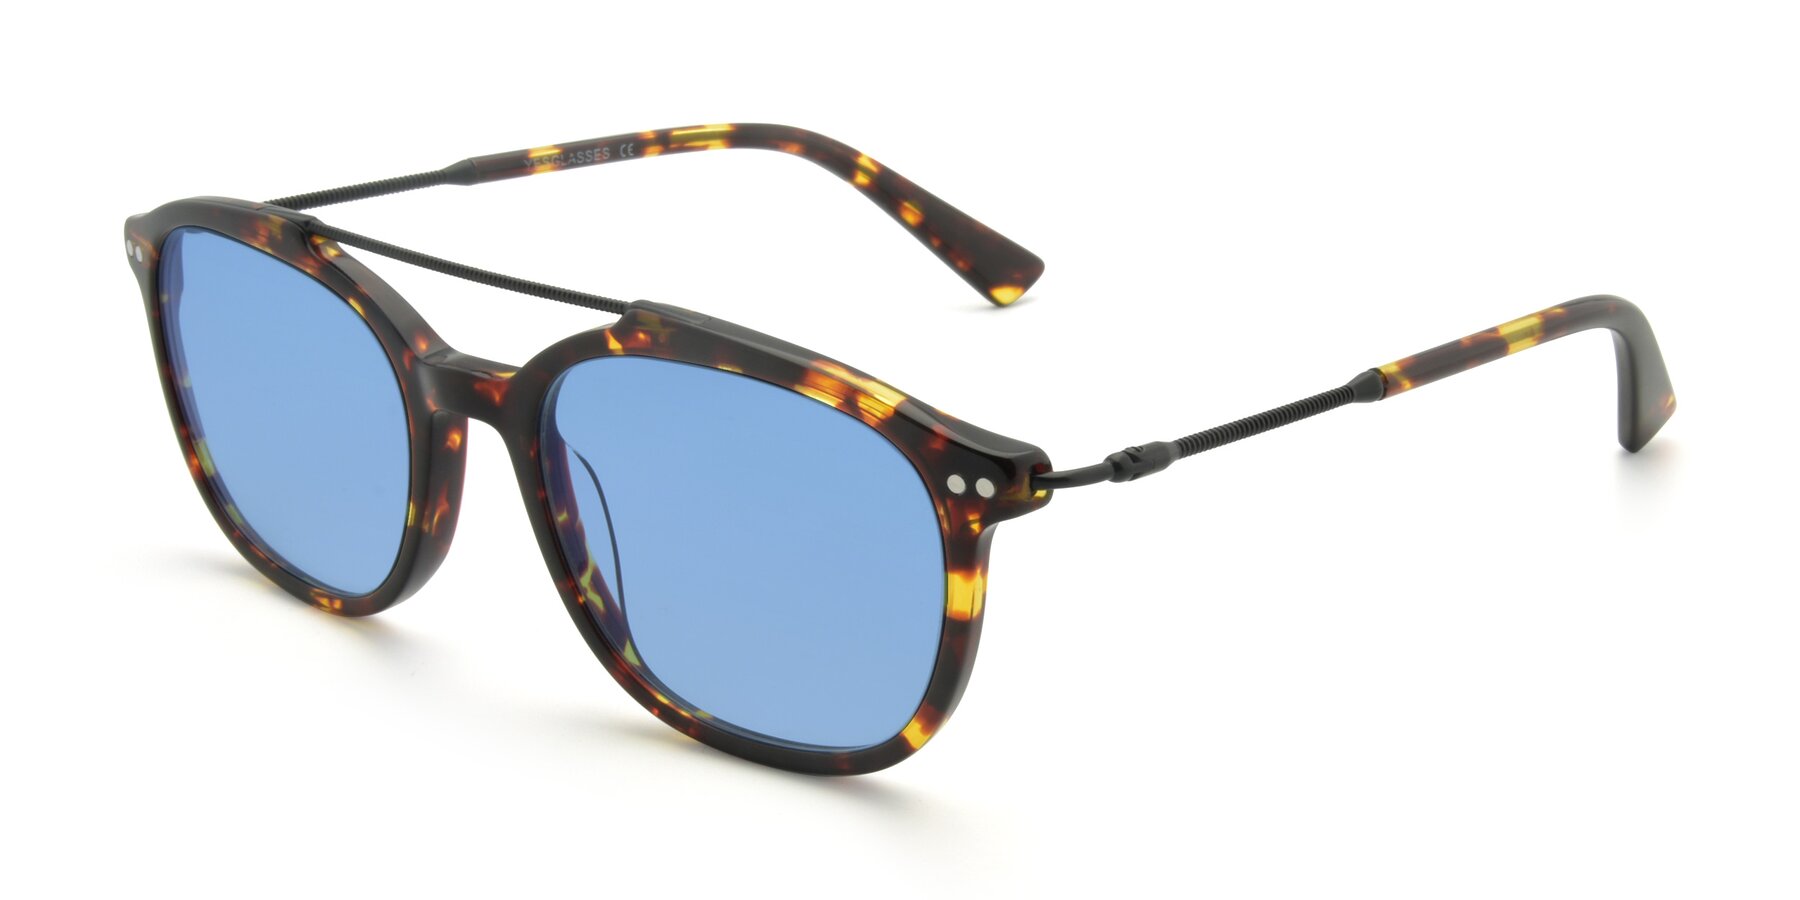 Angle of 17150 in Tortoise Brown with Medium Blue Tinted Lenses